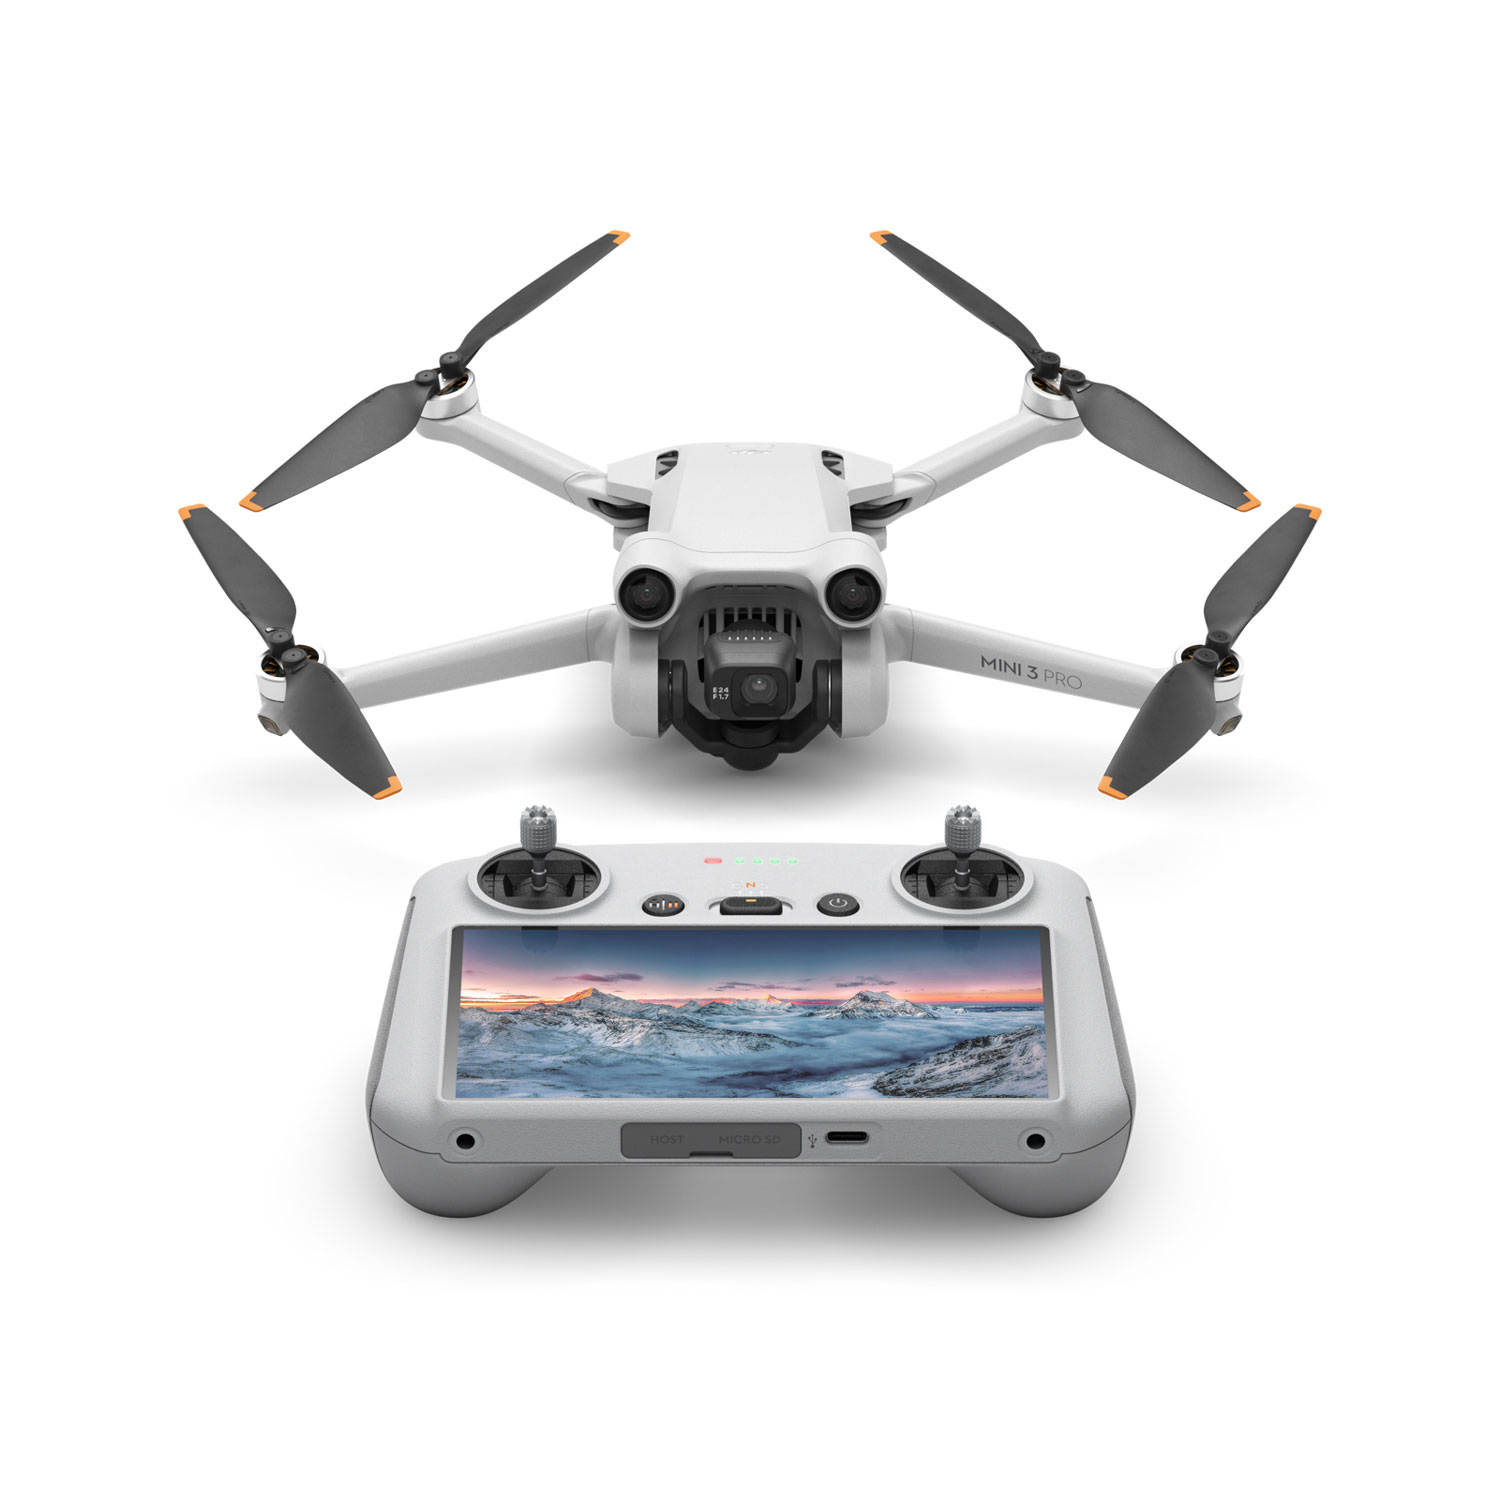 DJI Mini 3 Pro Quadcopter Drone and Remote Control with Built-in Screen (DJI RC) - Grey